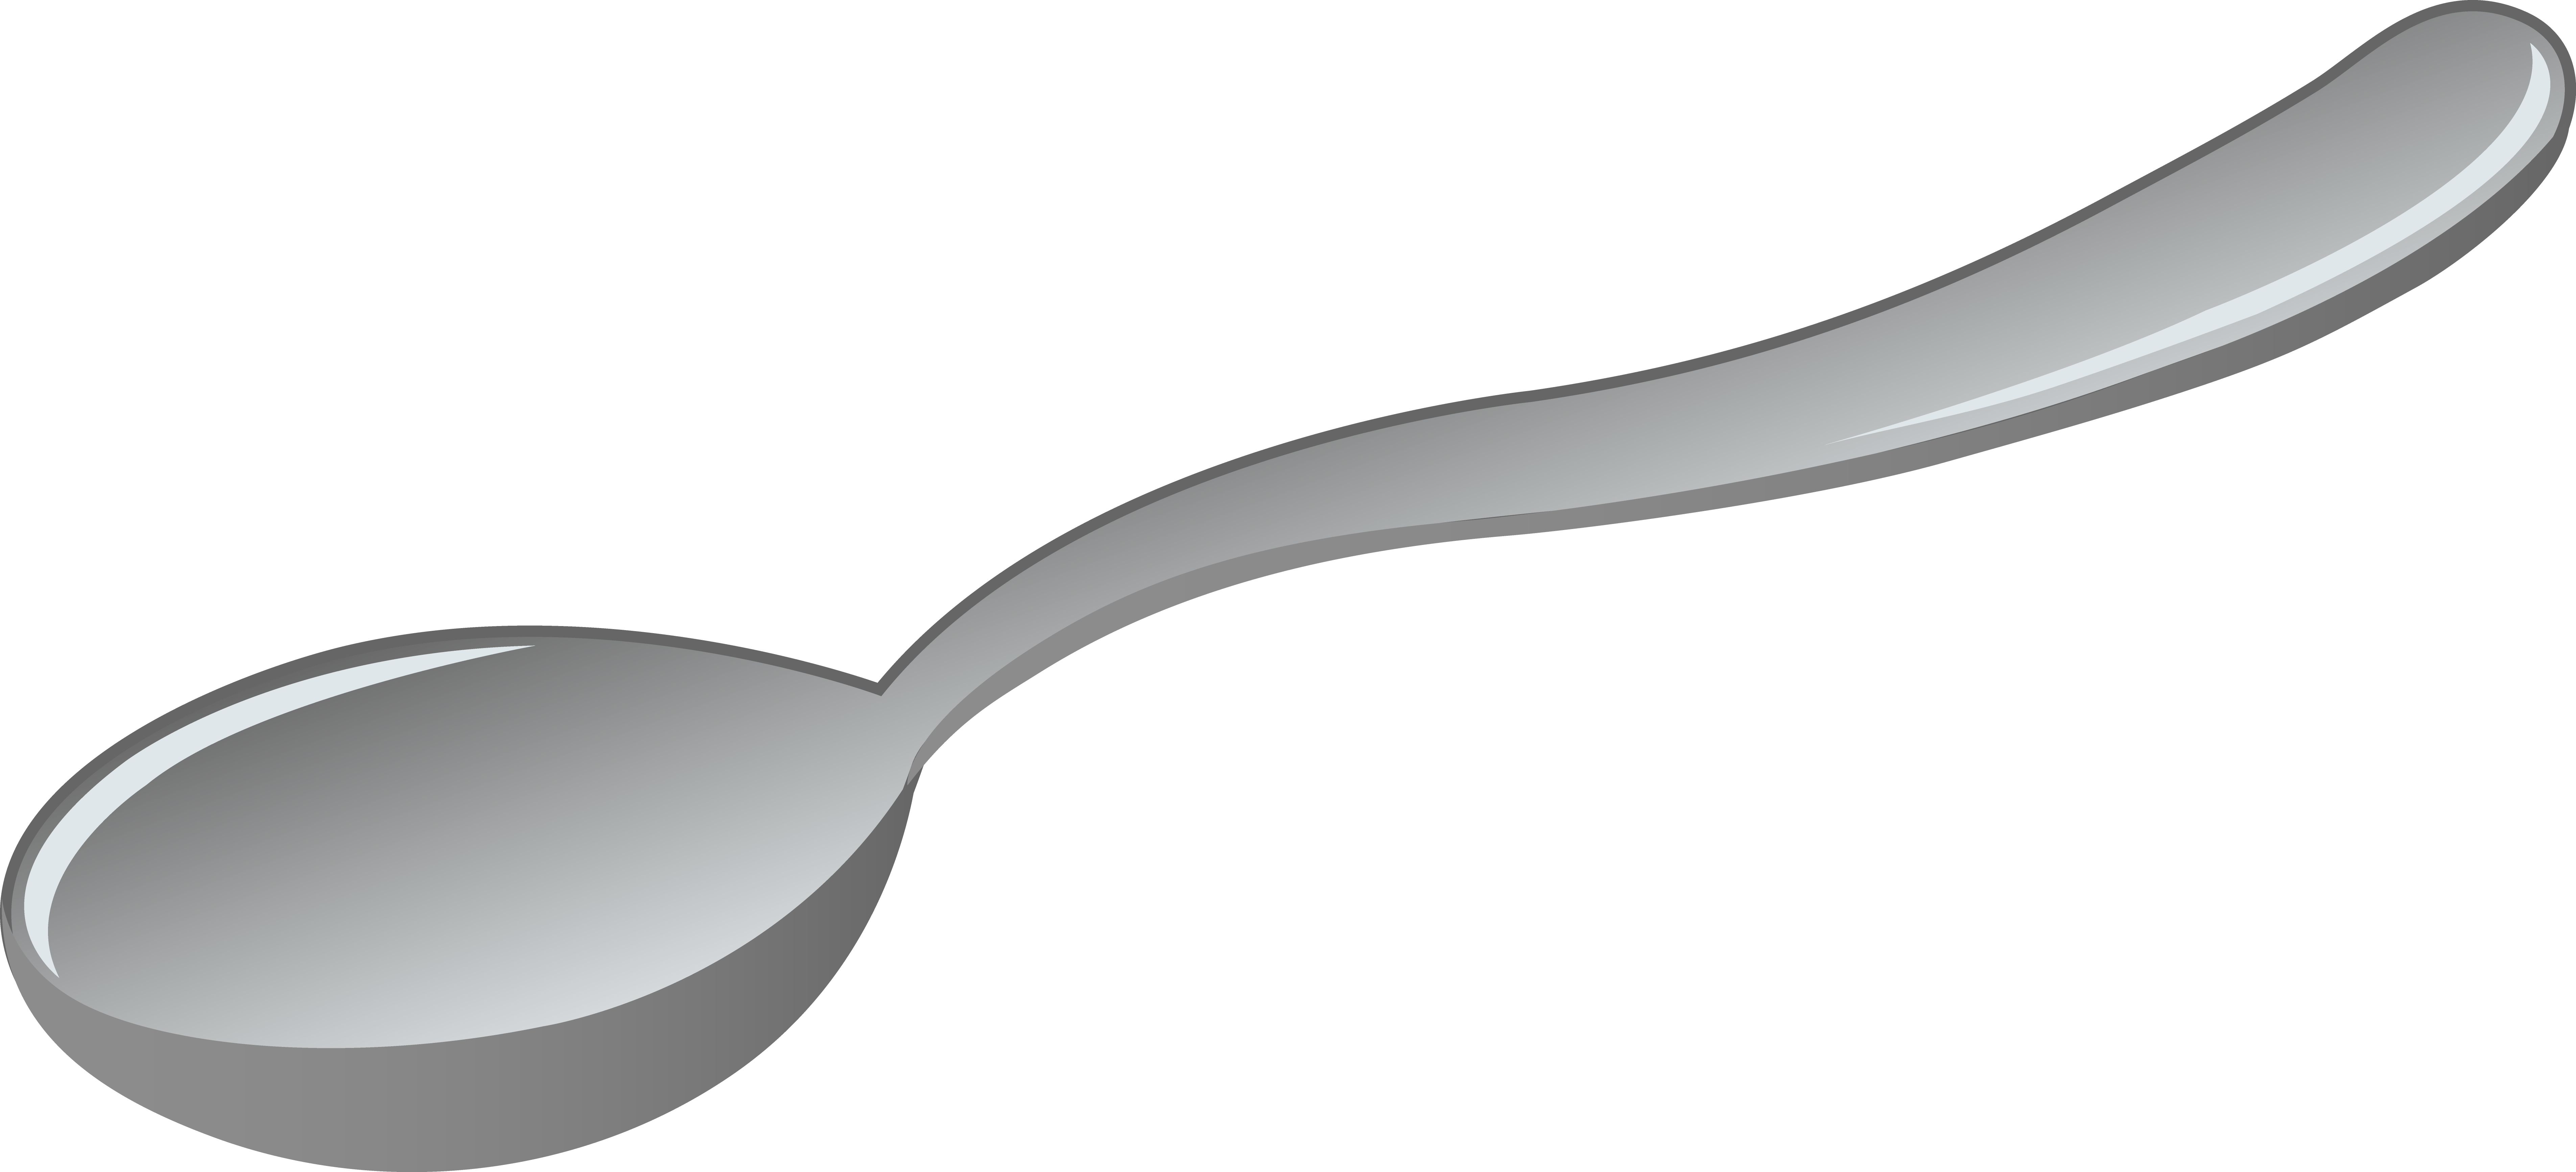 Amazing Spoon Pictures U0026 Backgrounds - Spoon, Transparent background PNG HD thumbnail